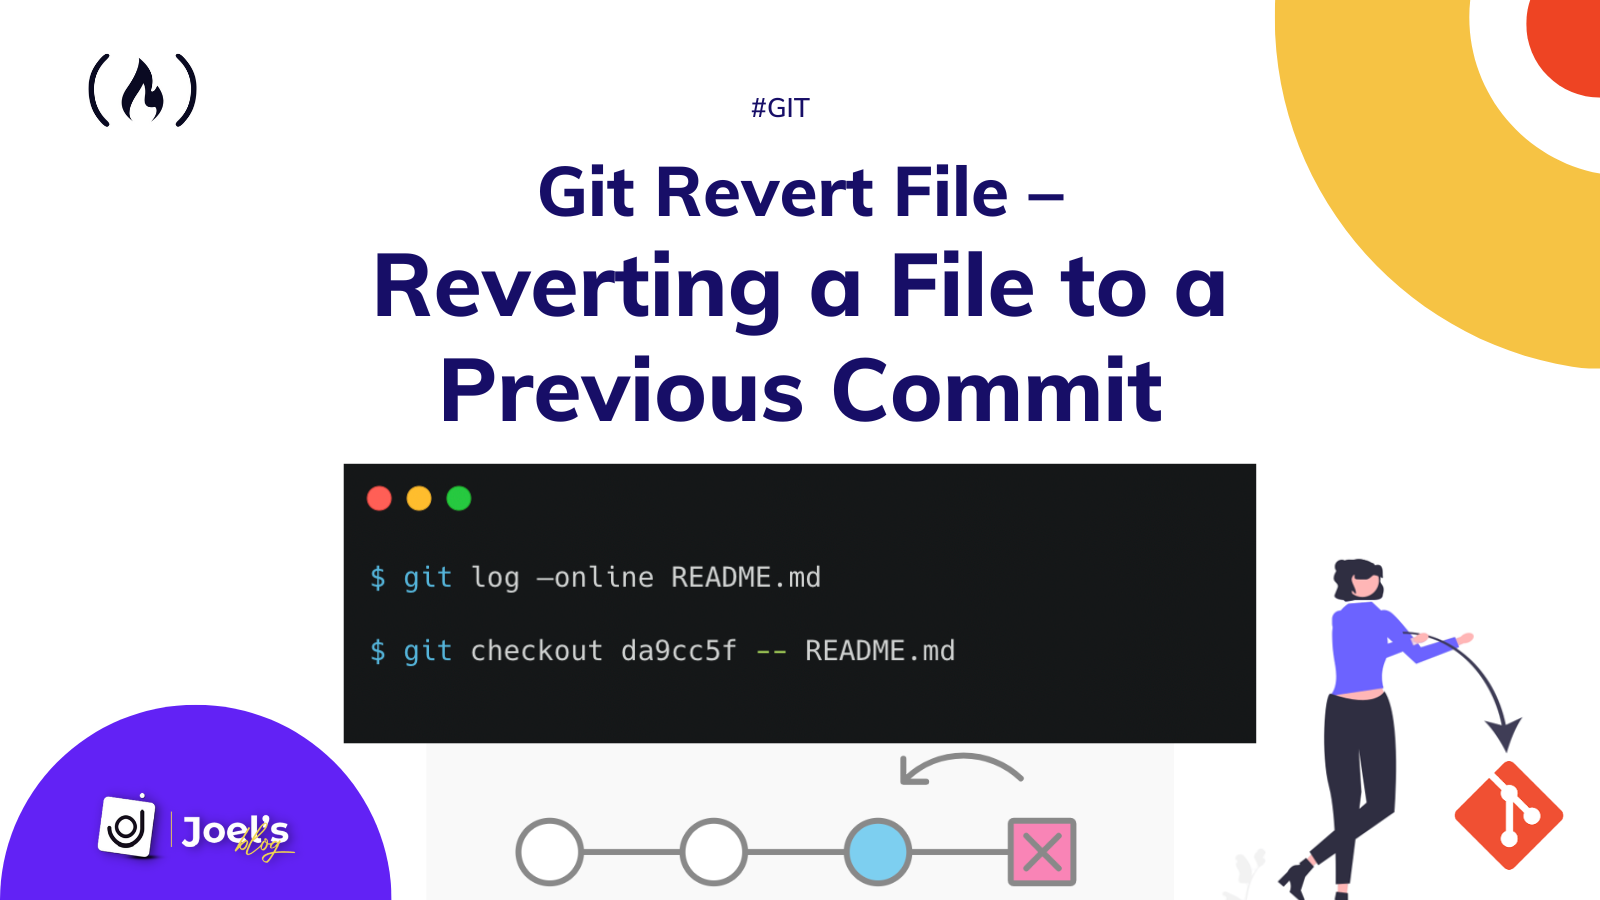 Git Revert File – Reverting a File to a Previous Commit